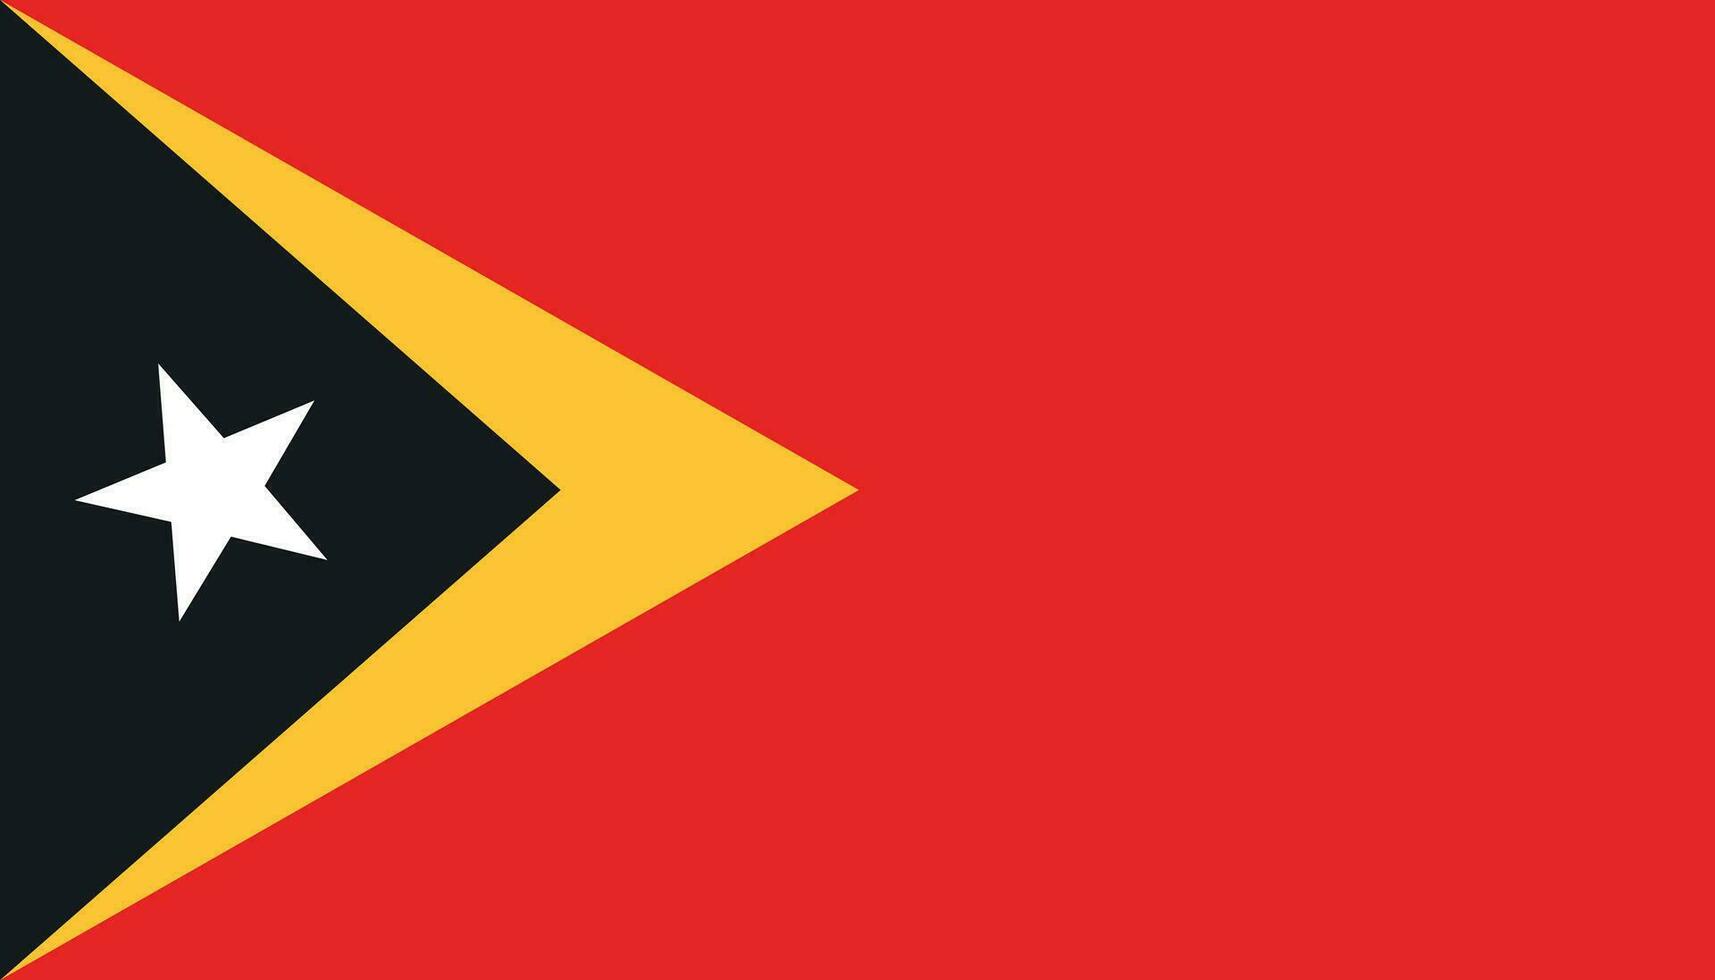 East Timor flag icon in flat style. National sign vector illustration. Politic business concept.